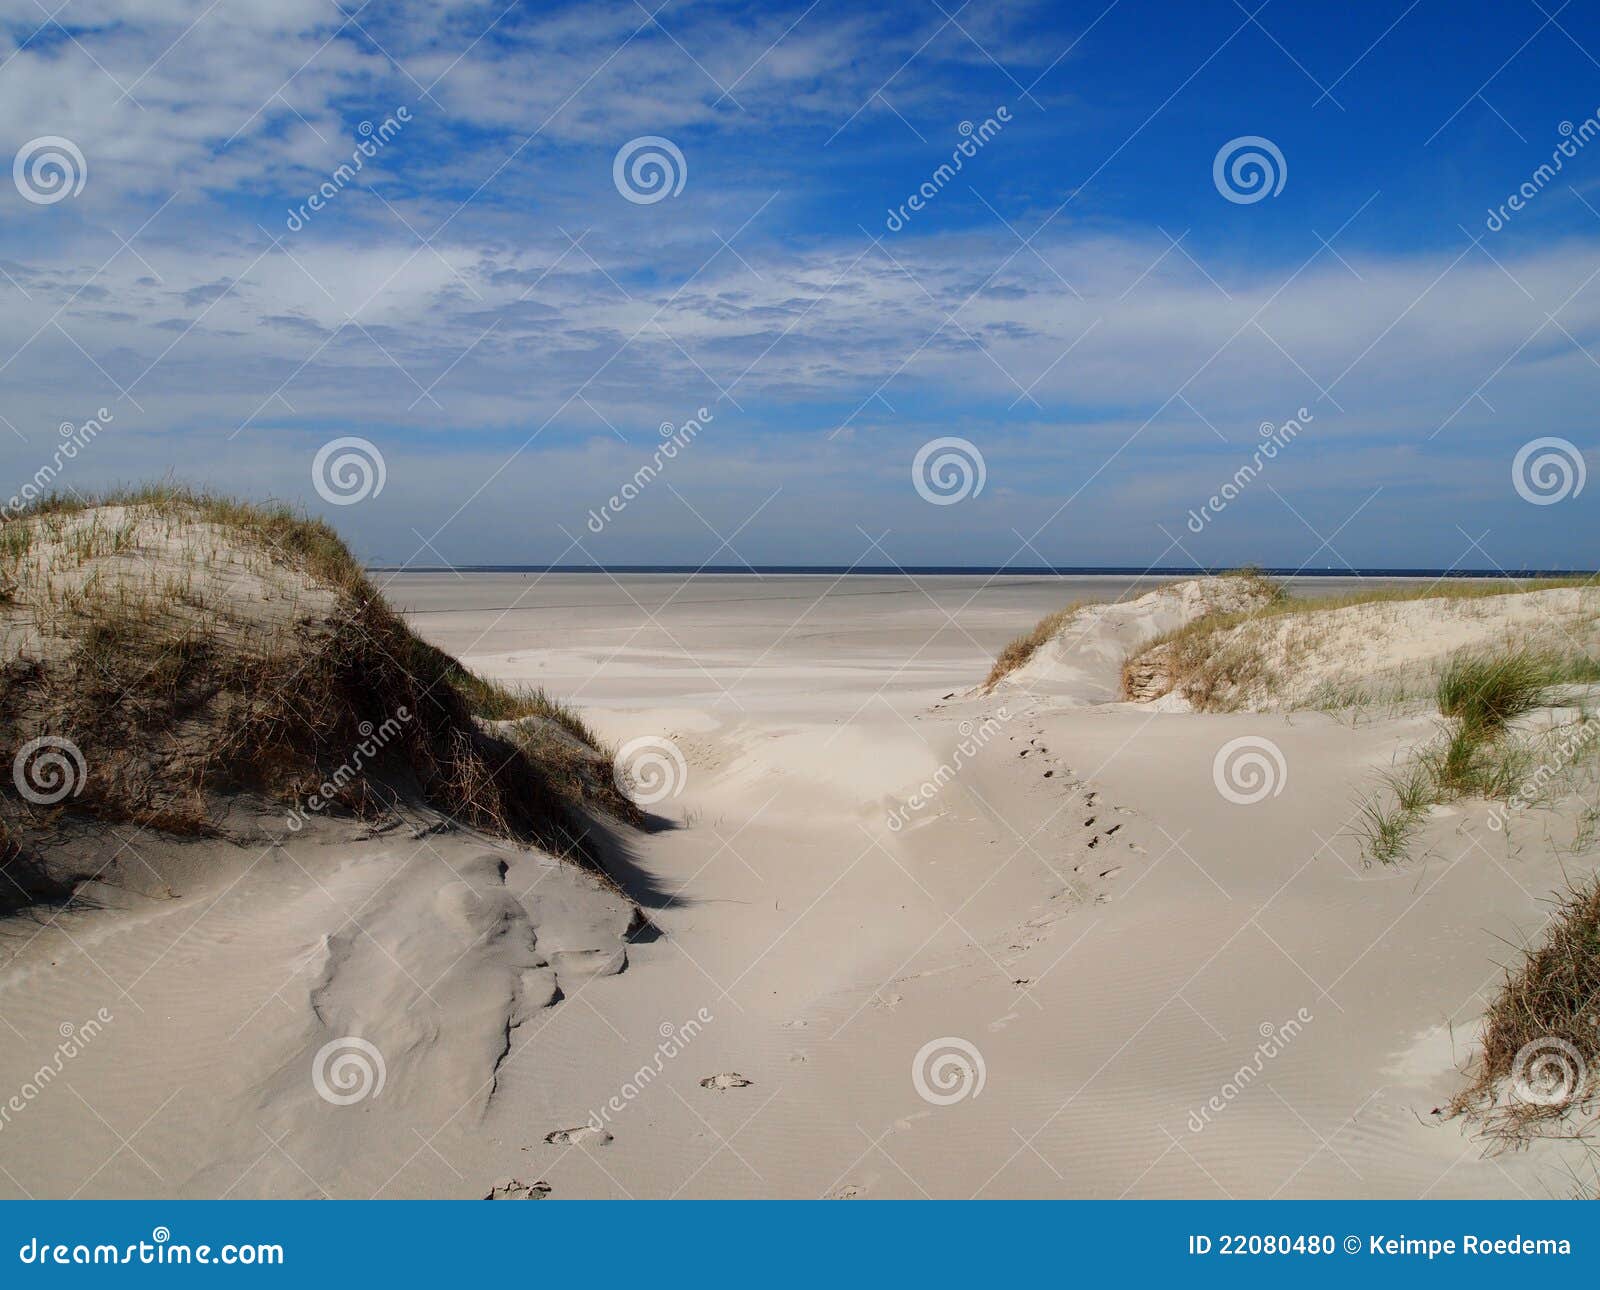 one of the beaches of terschelling, netherlands